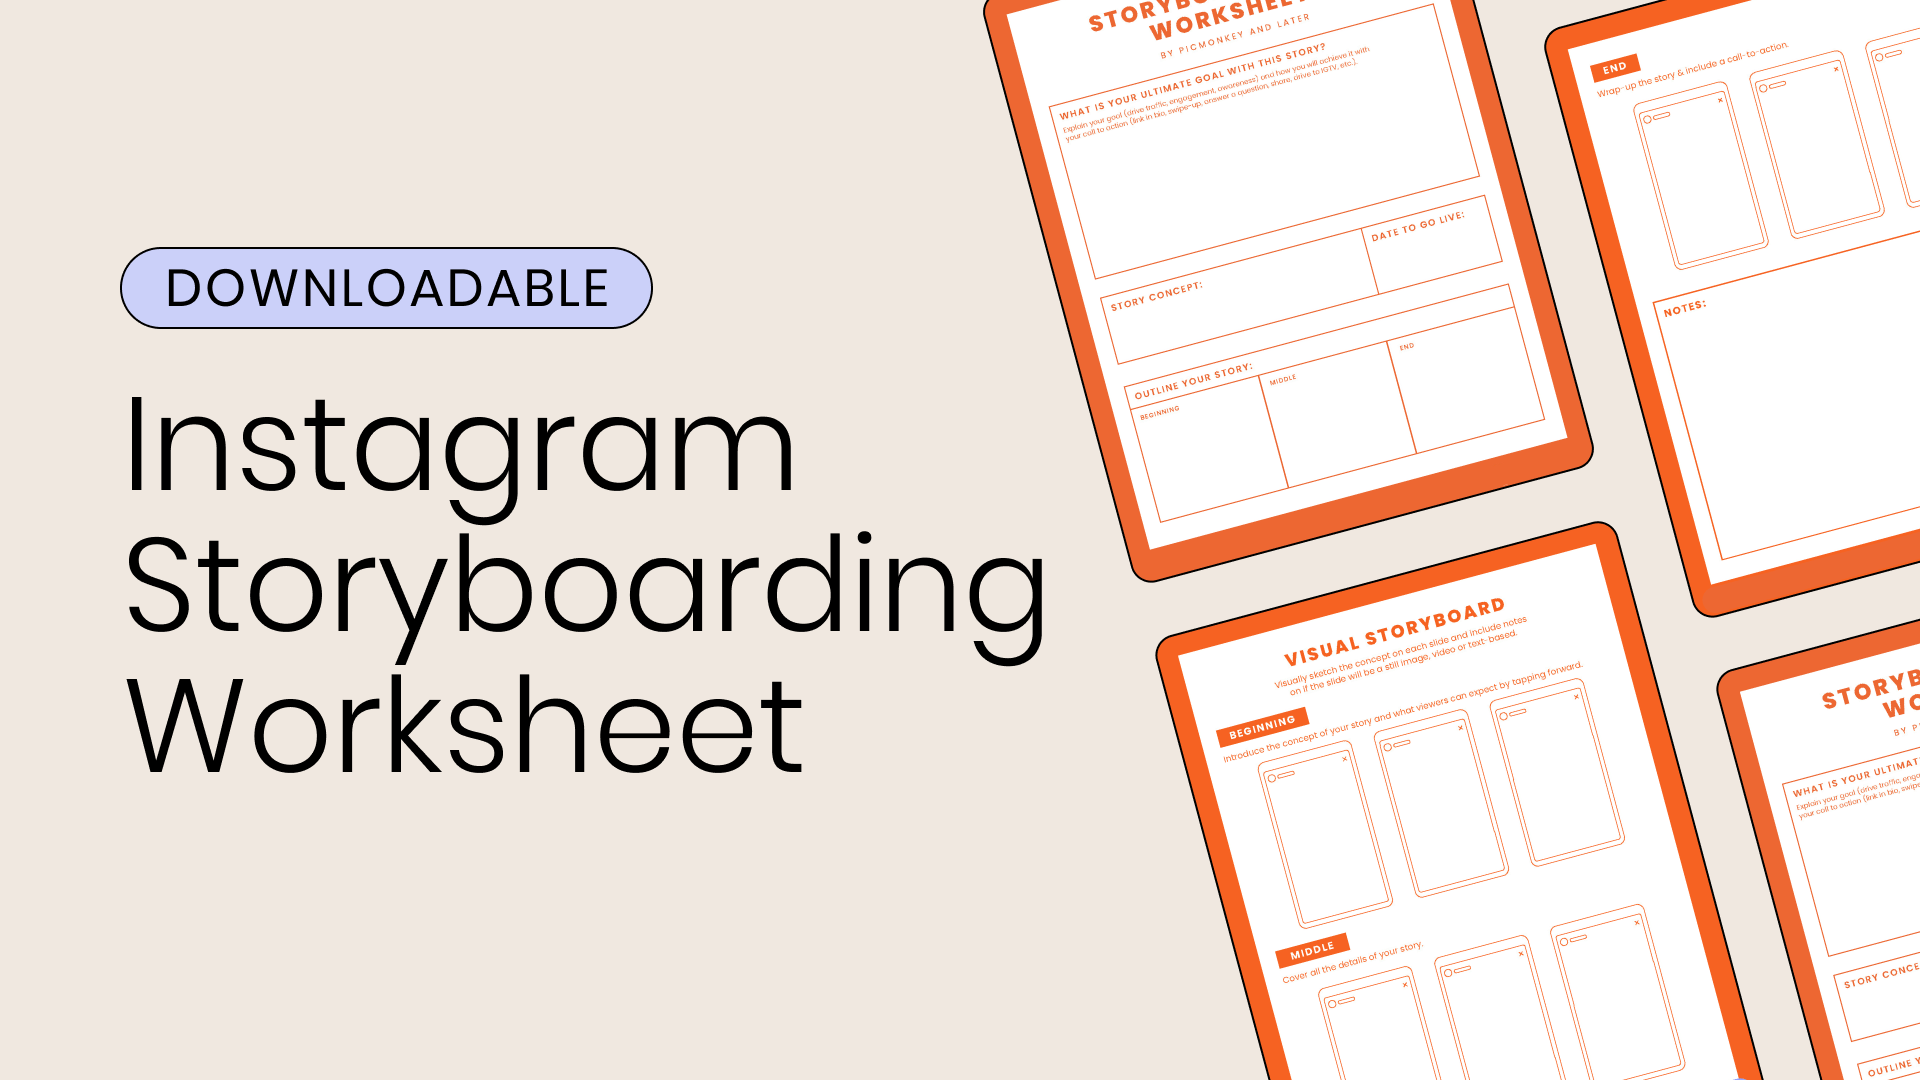 Thumbnail image reading Downloadable Instagram Storyboarding worksheet with graphic of worksheet